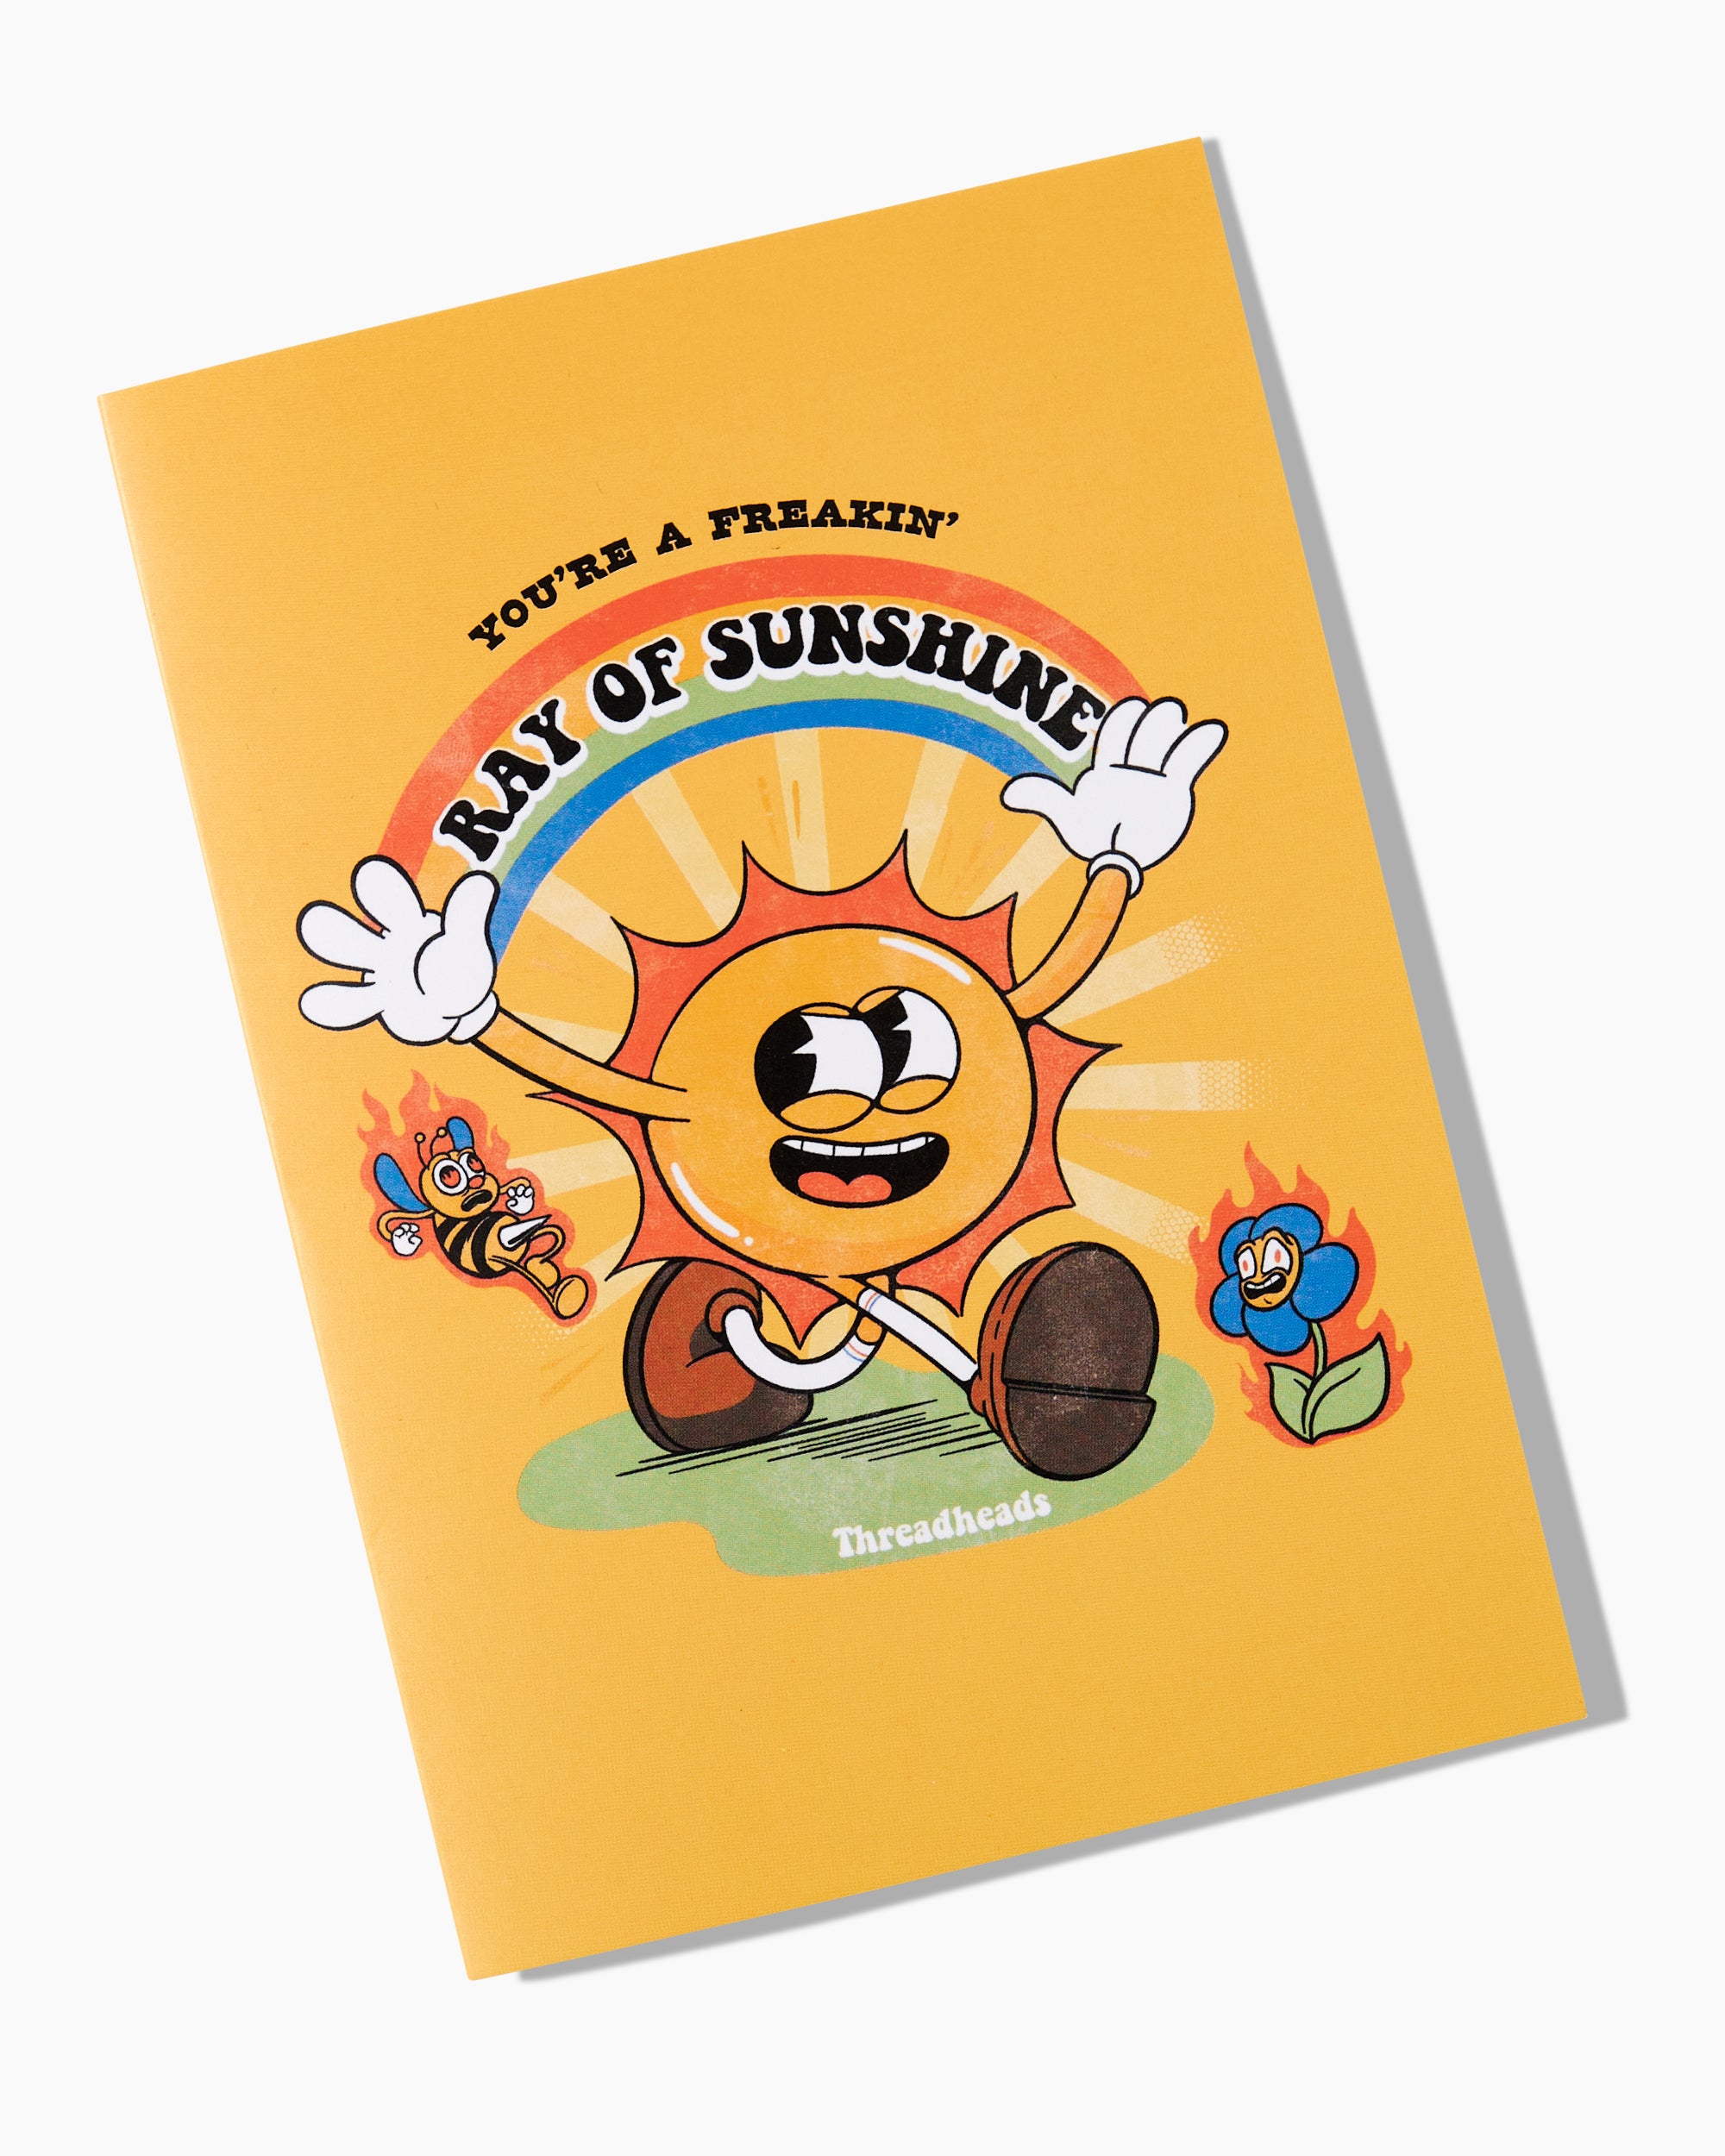 You're A Freaking Ray of Sunshine Greeting Card Australia Online